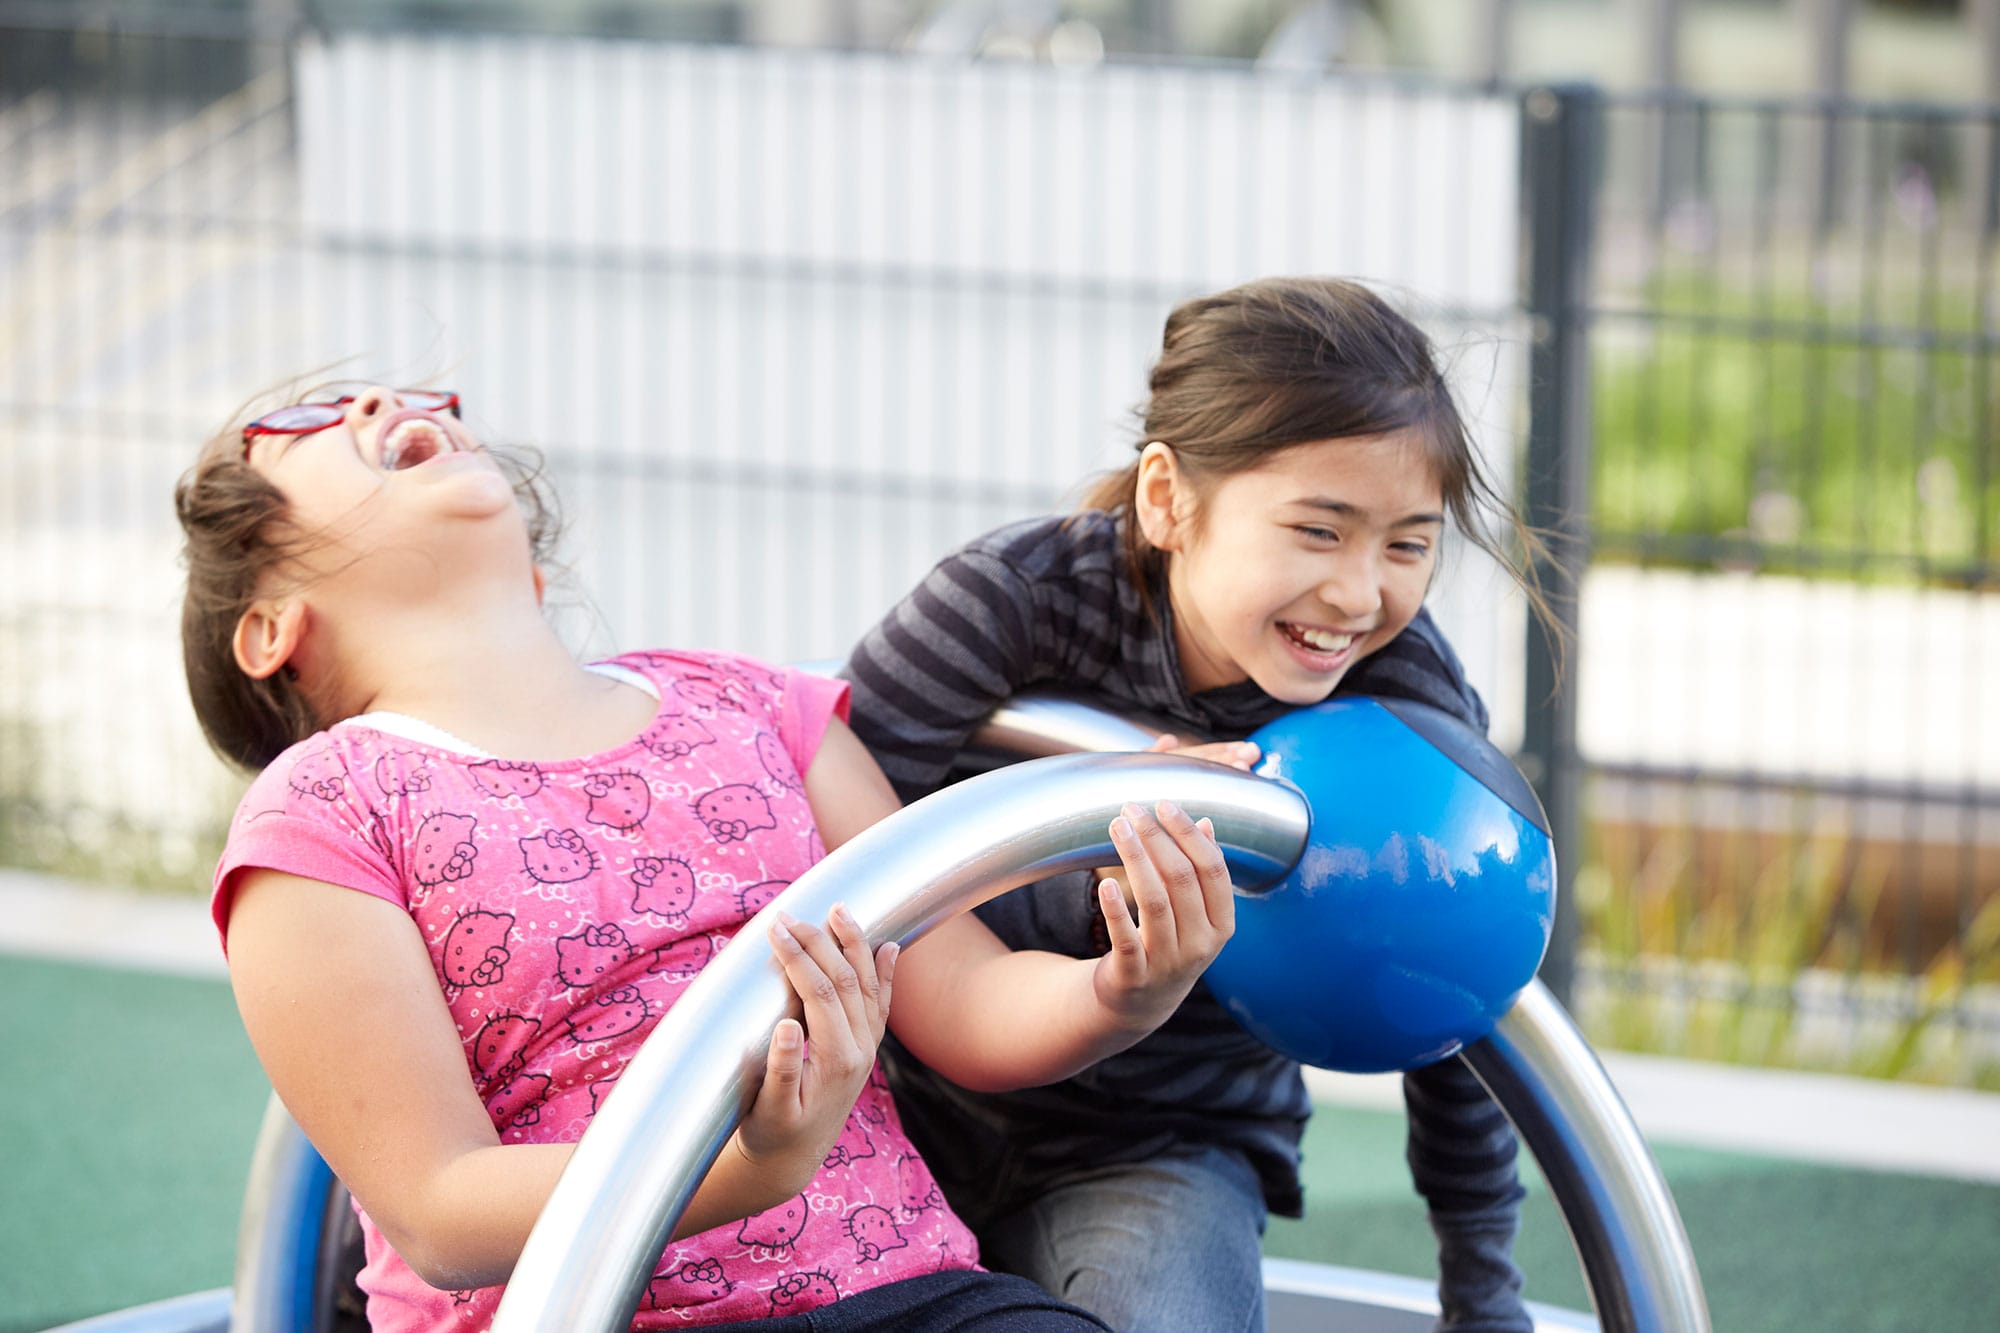 Two girls playing on a playground with a blue ball.